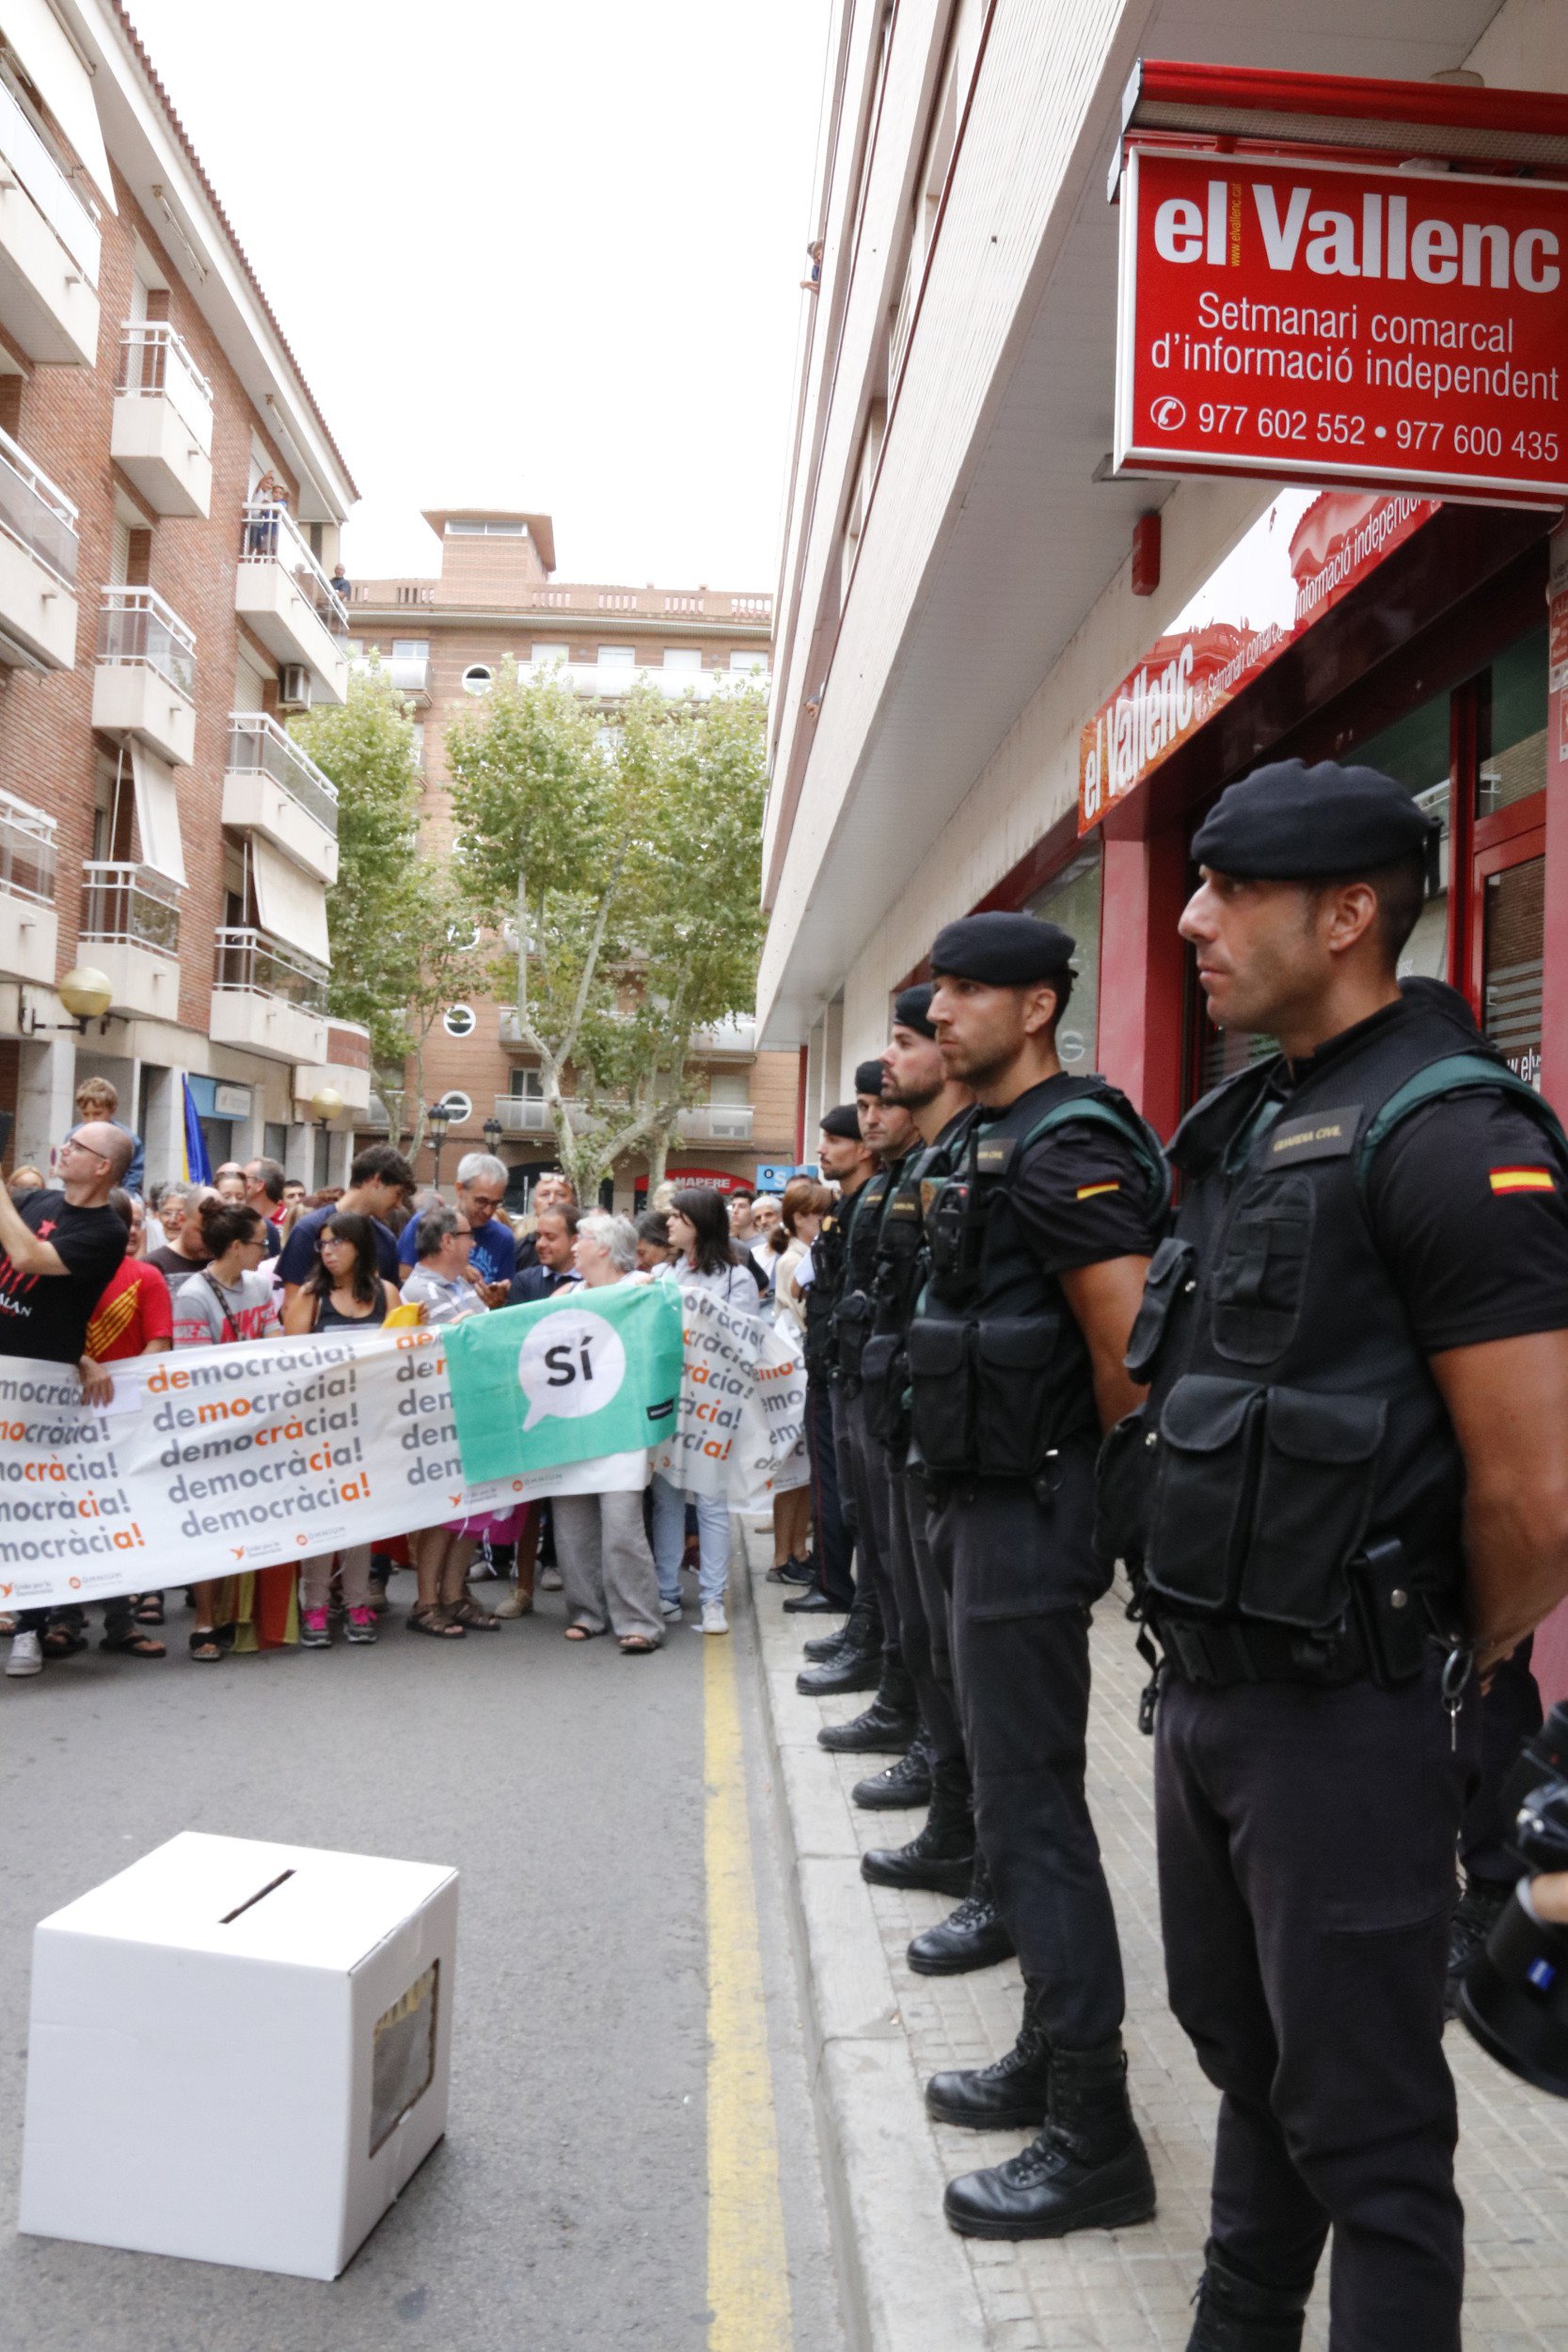 Protesters wave off the Civil Guard: "Have a good time and thank you very much"